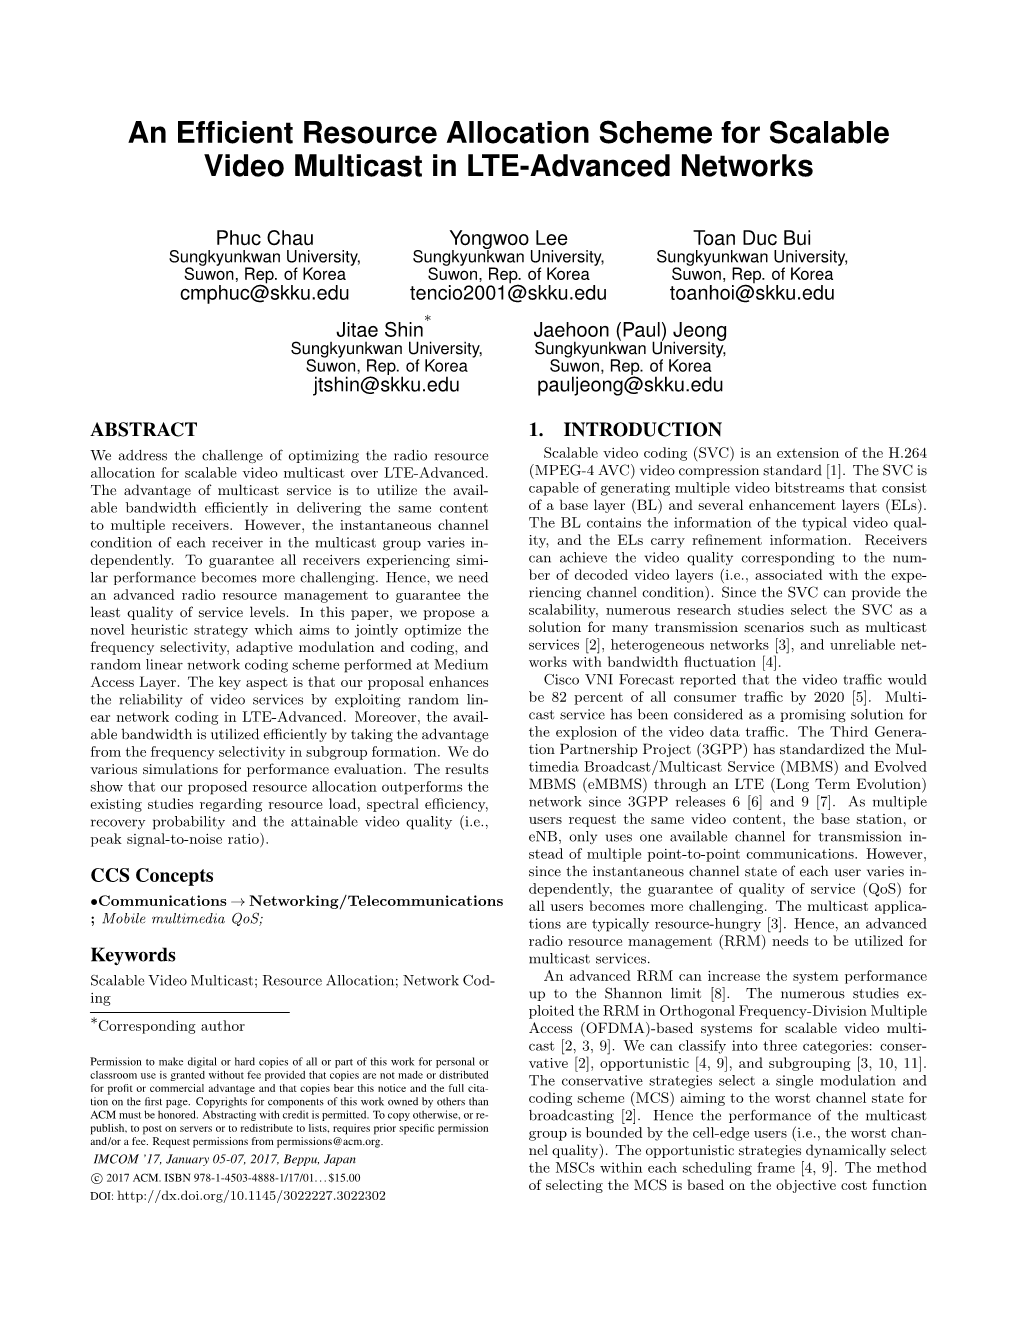 An Efficient Resource Allocation Scheme for Scalable Video